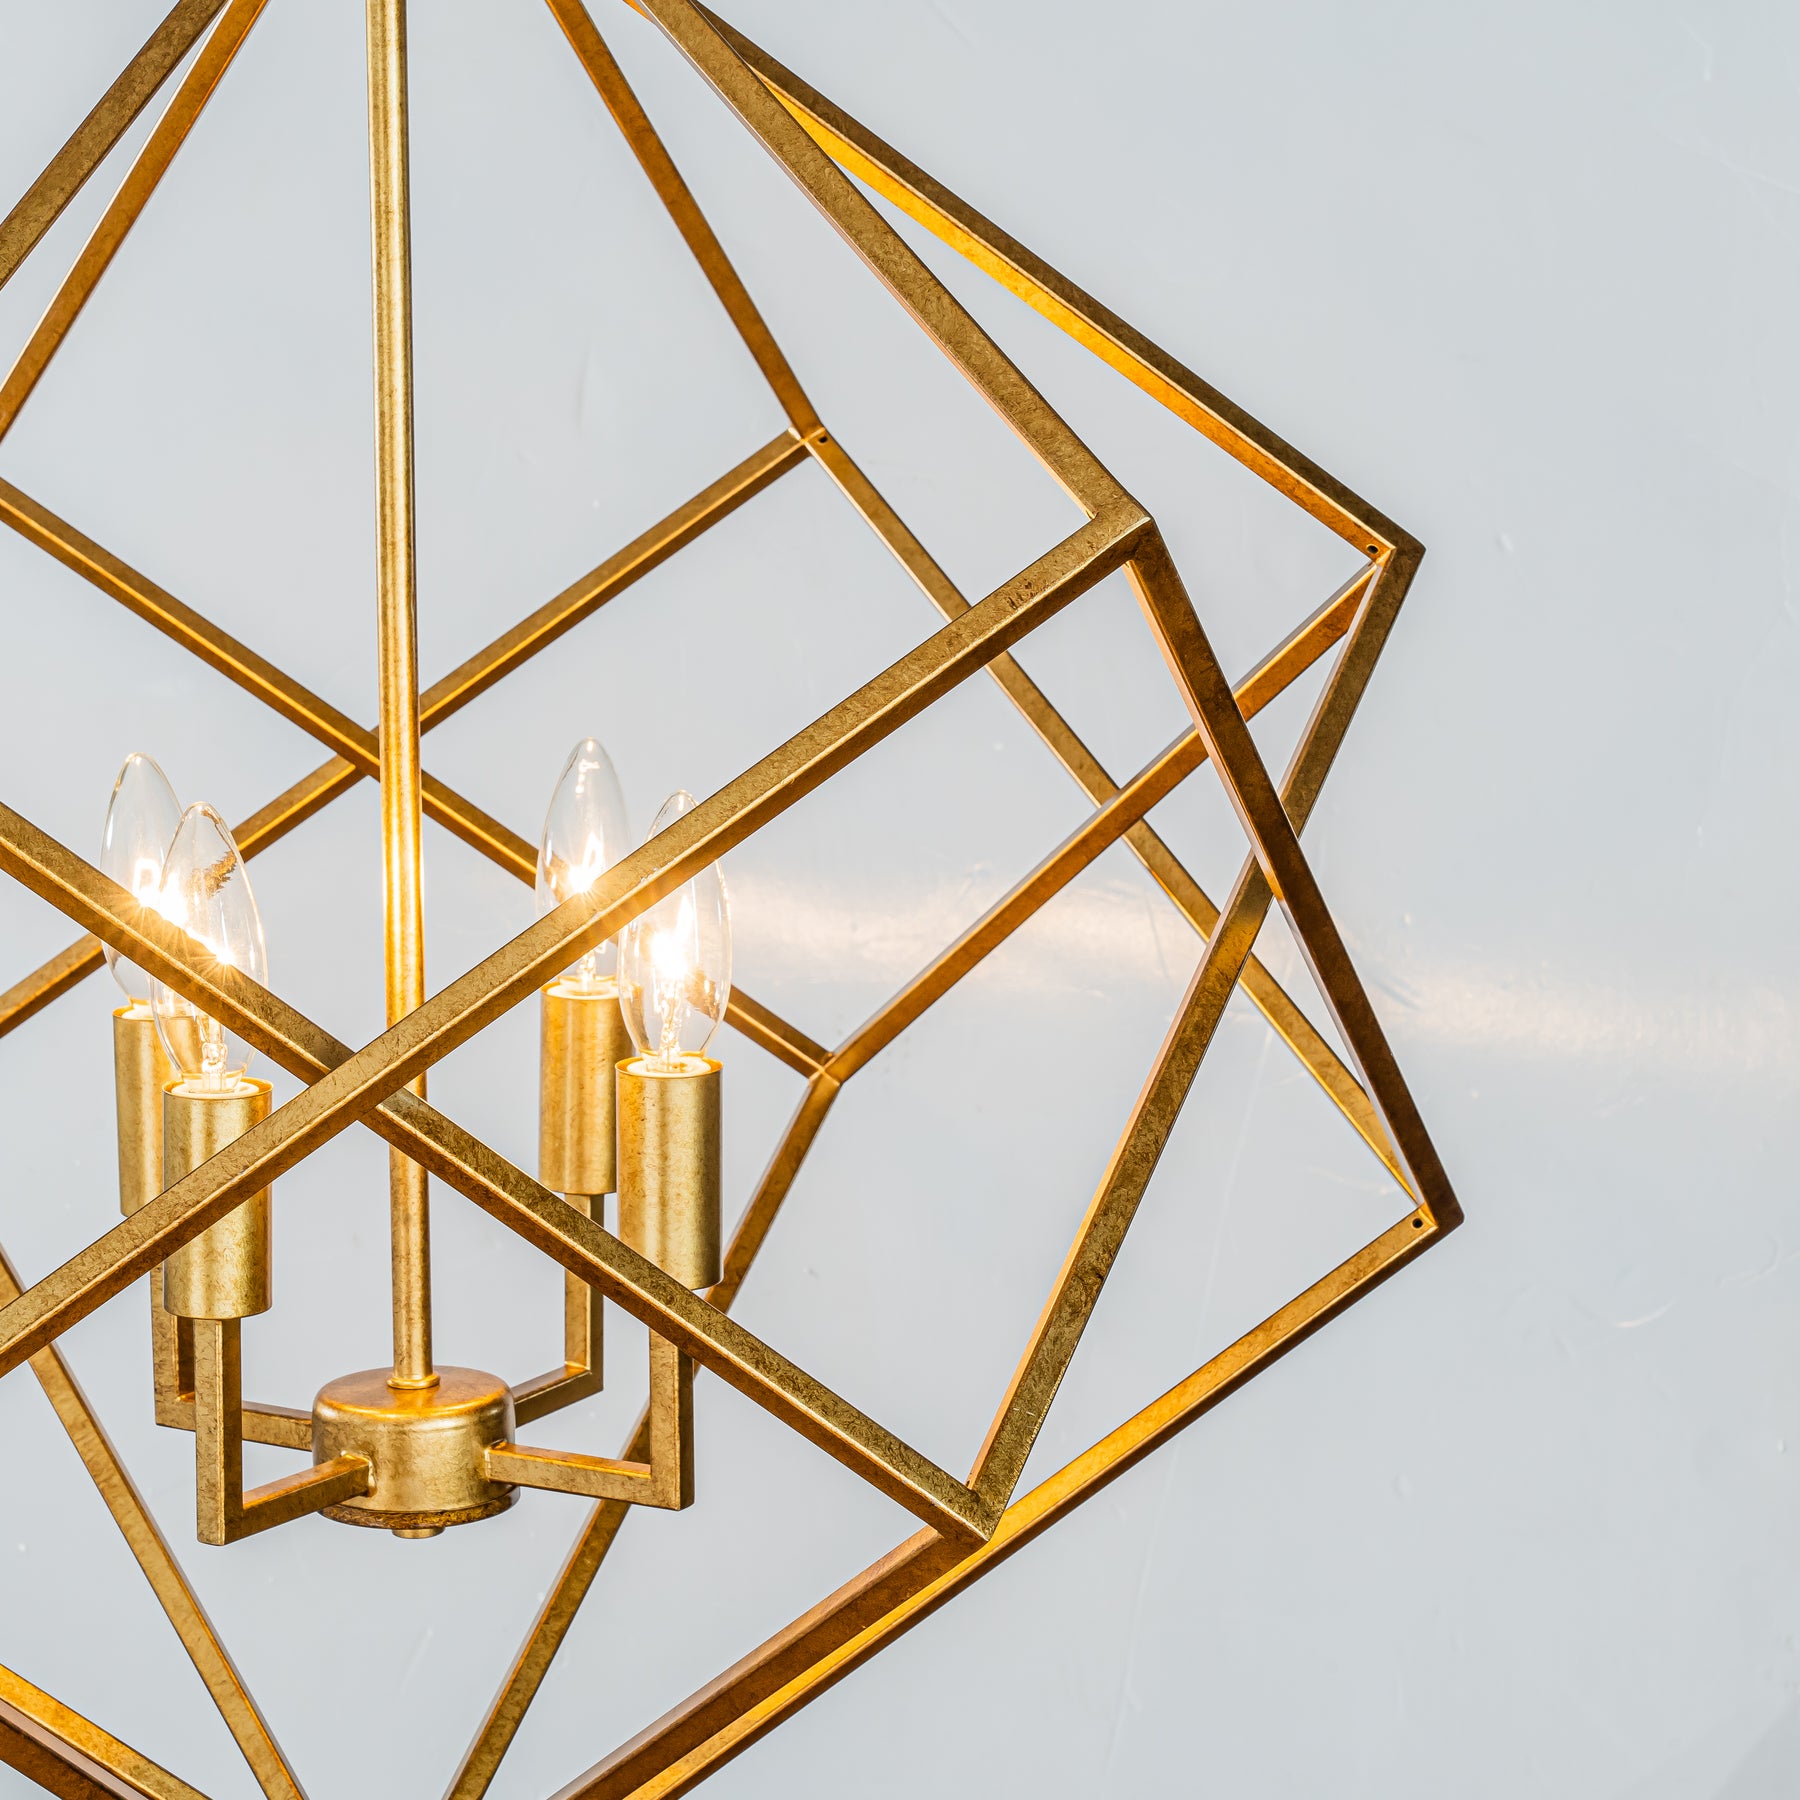 Modern Geometric Chandelier Metal Caged Ceiling Hanging Pendant in Antique Gold